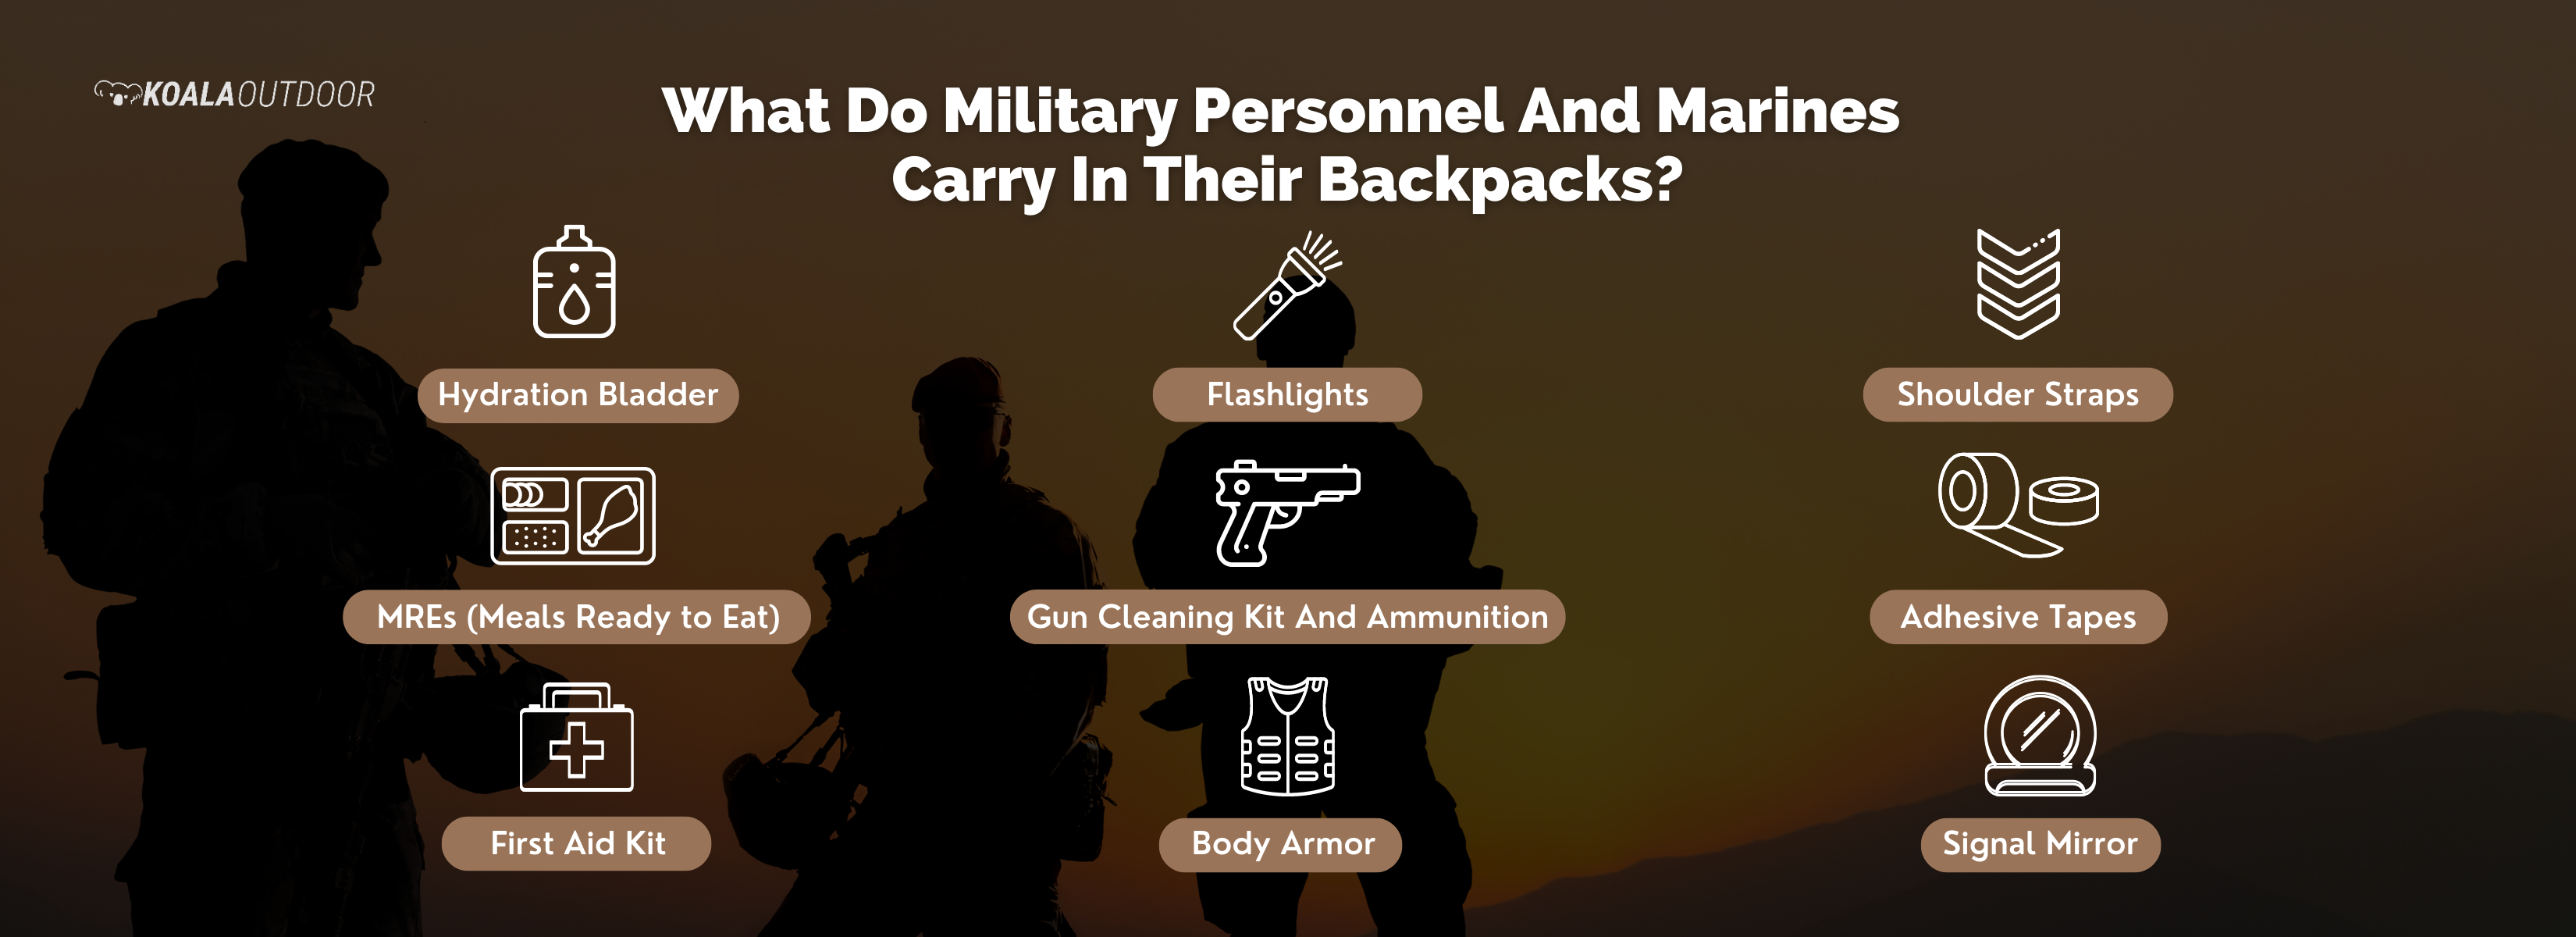 What Do Soldiers And Marines Carry In Their Backpacks?